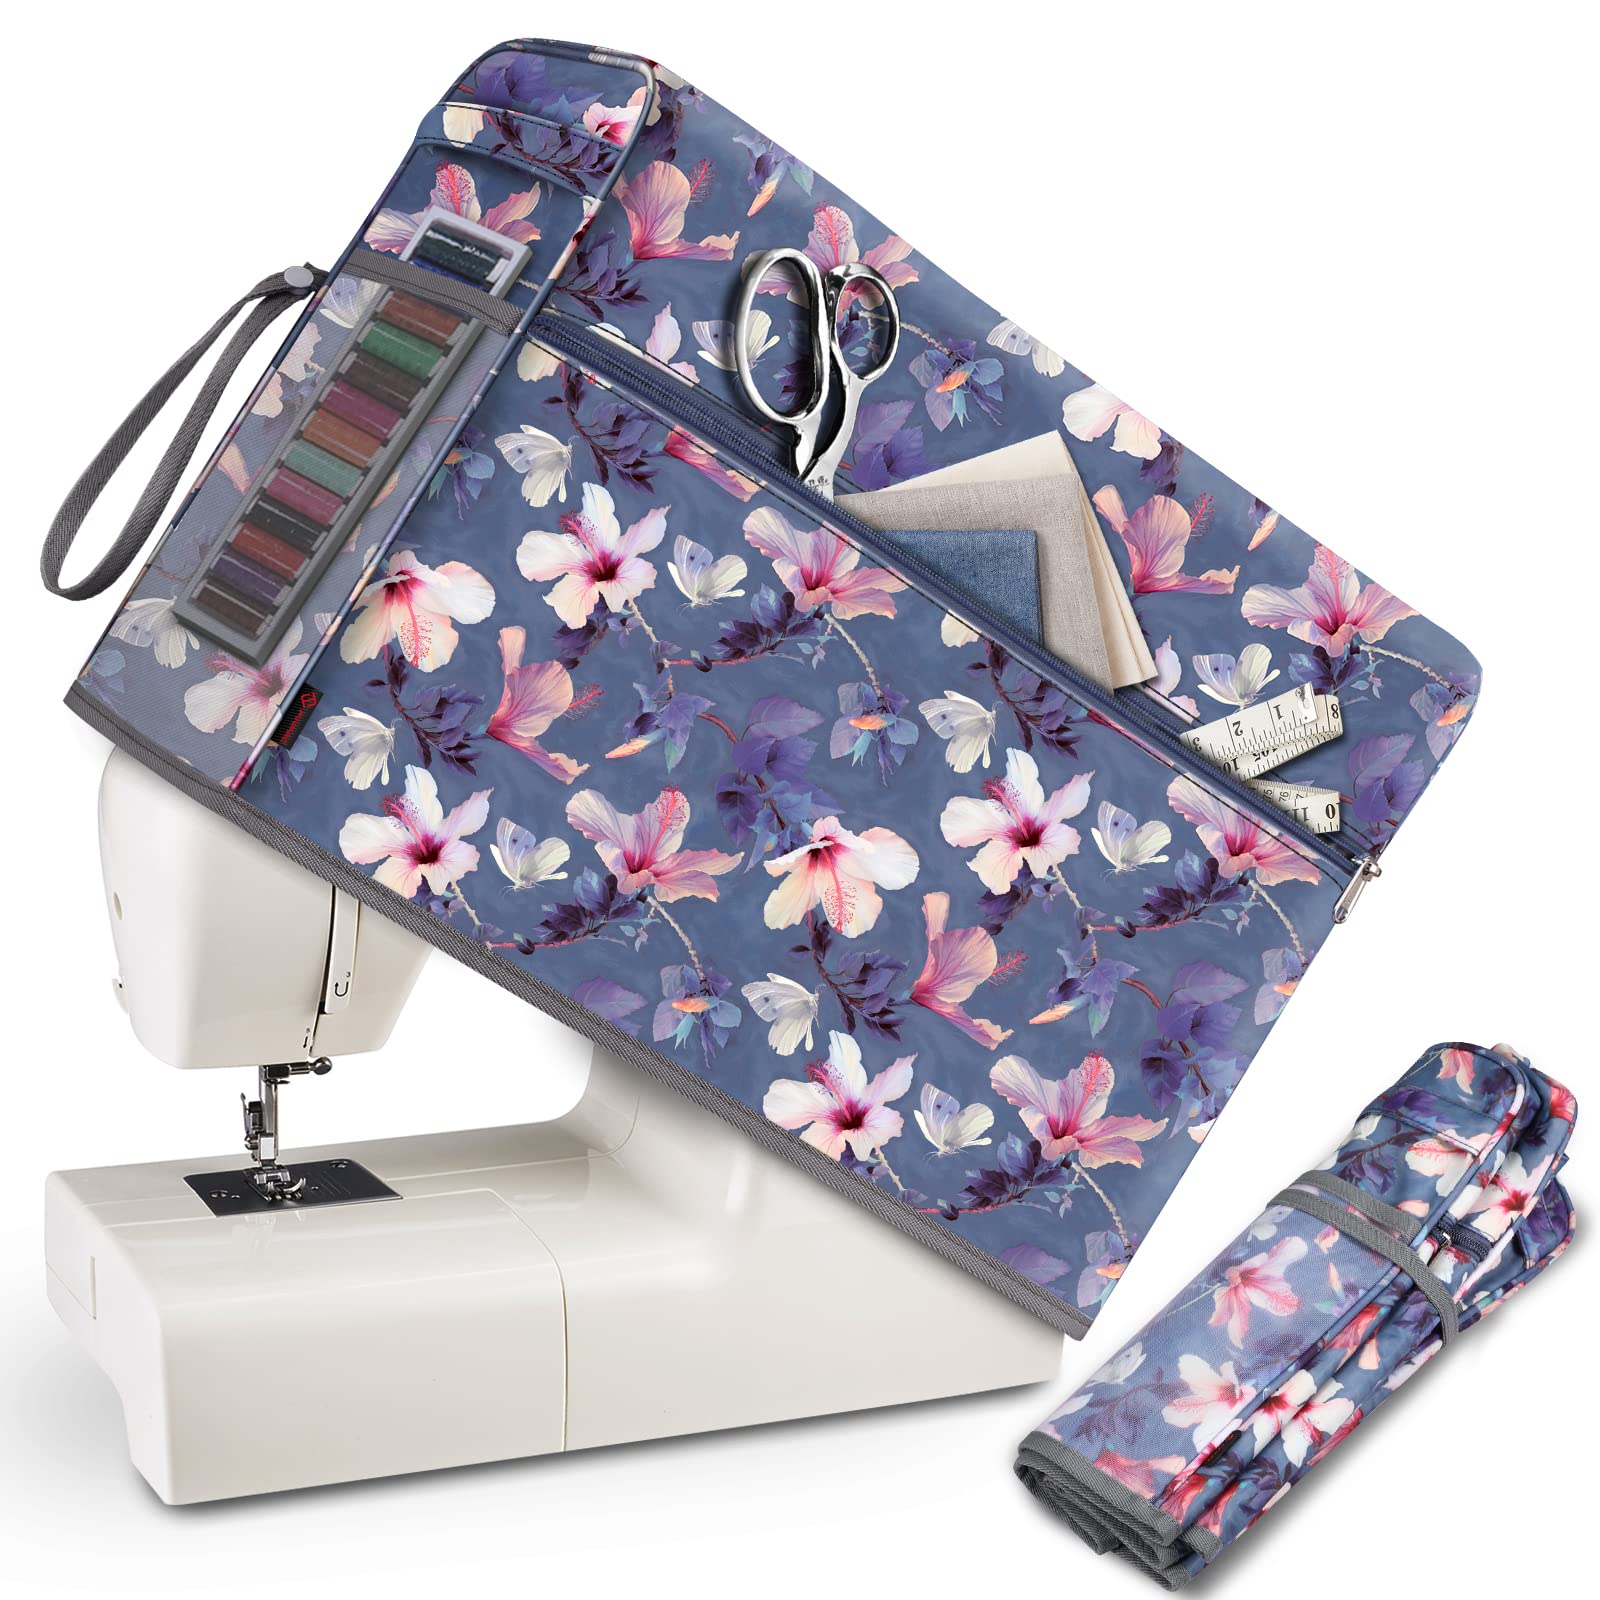 Brother Sewing Machine and Accessories Tote | SASEWTOTE